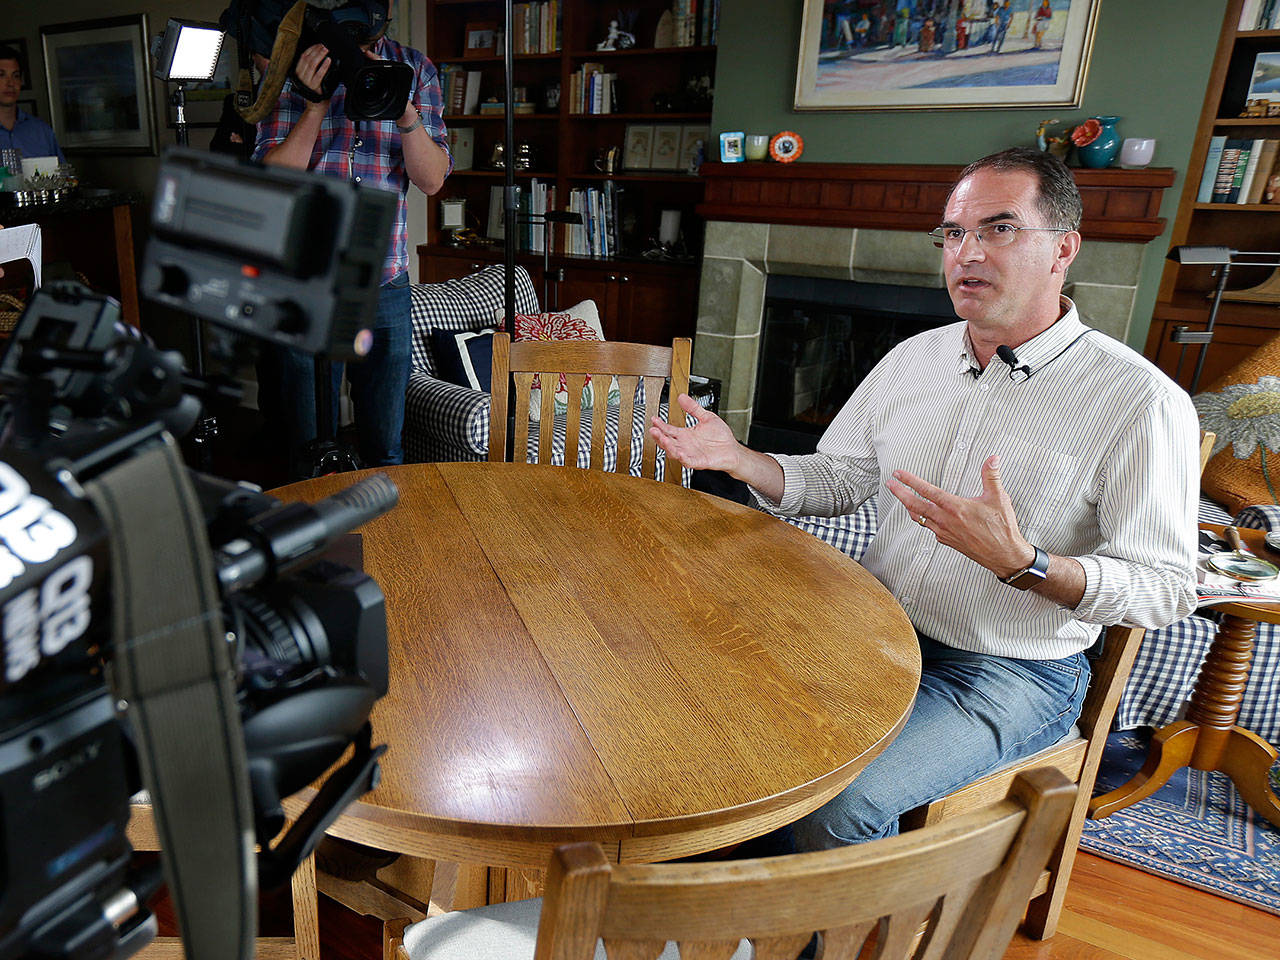 Mark Elster talks to reporters during a news conference in his home Wednesday in Seattle. Elster is a plaintiff in a new lawsuit challenging Seattle’s first-in-the-nation voucher system for publicly financing political campaigns. (AP Photo / Ted S. Warren)